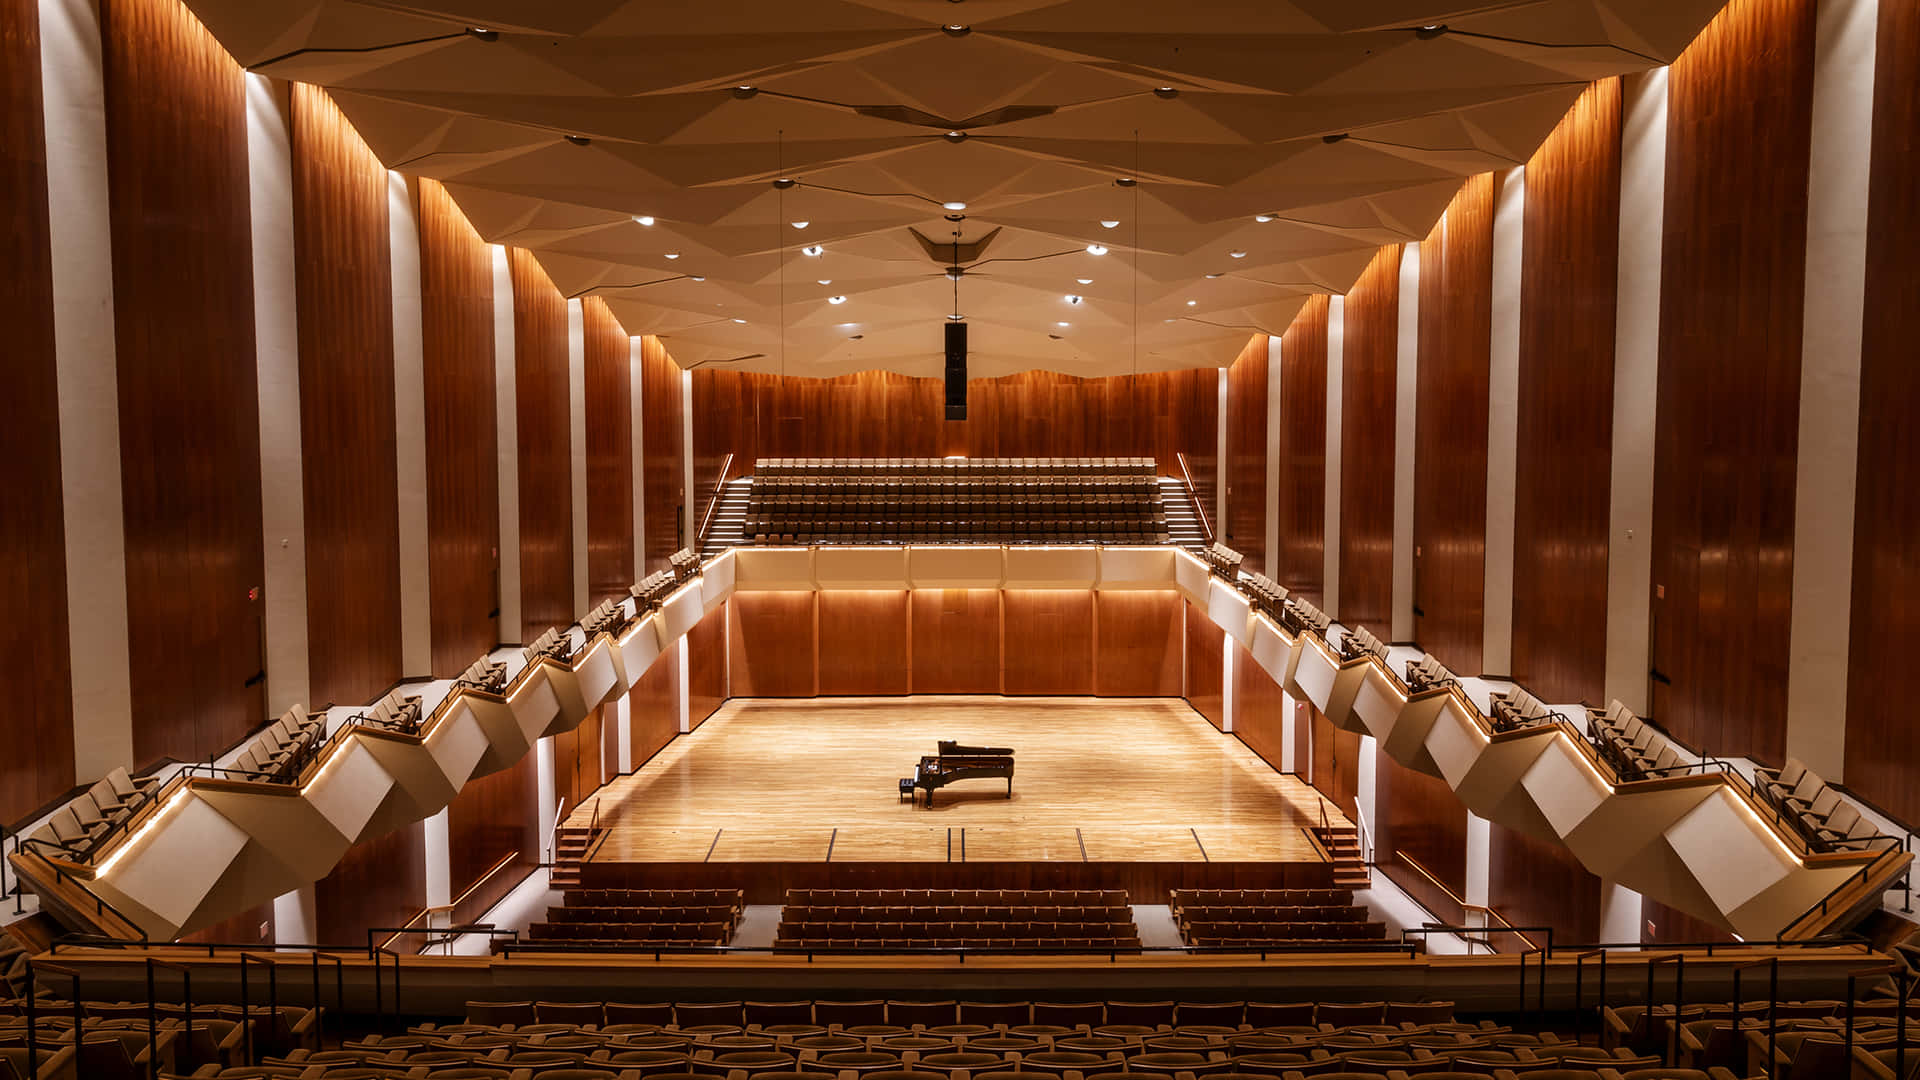 A Large Auditorium With Wooden Walls And A Piano